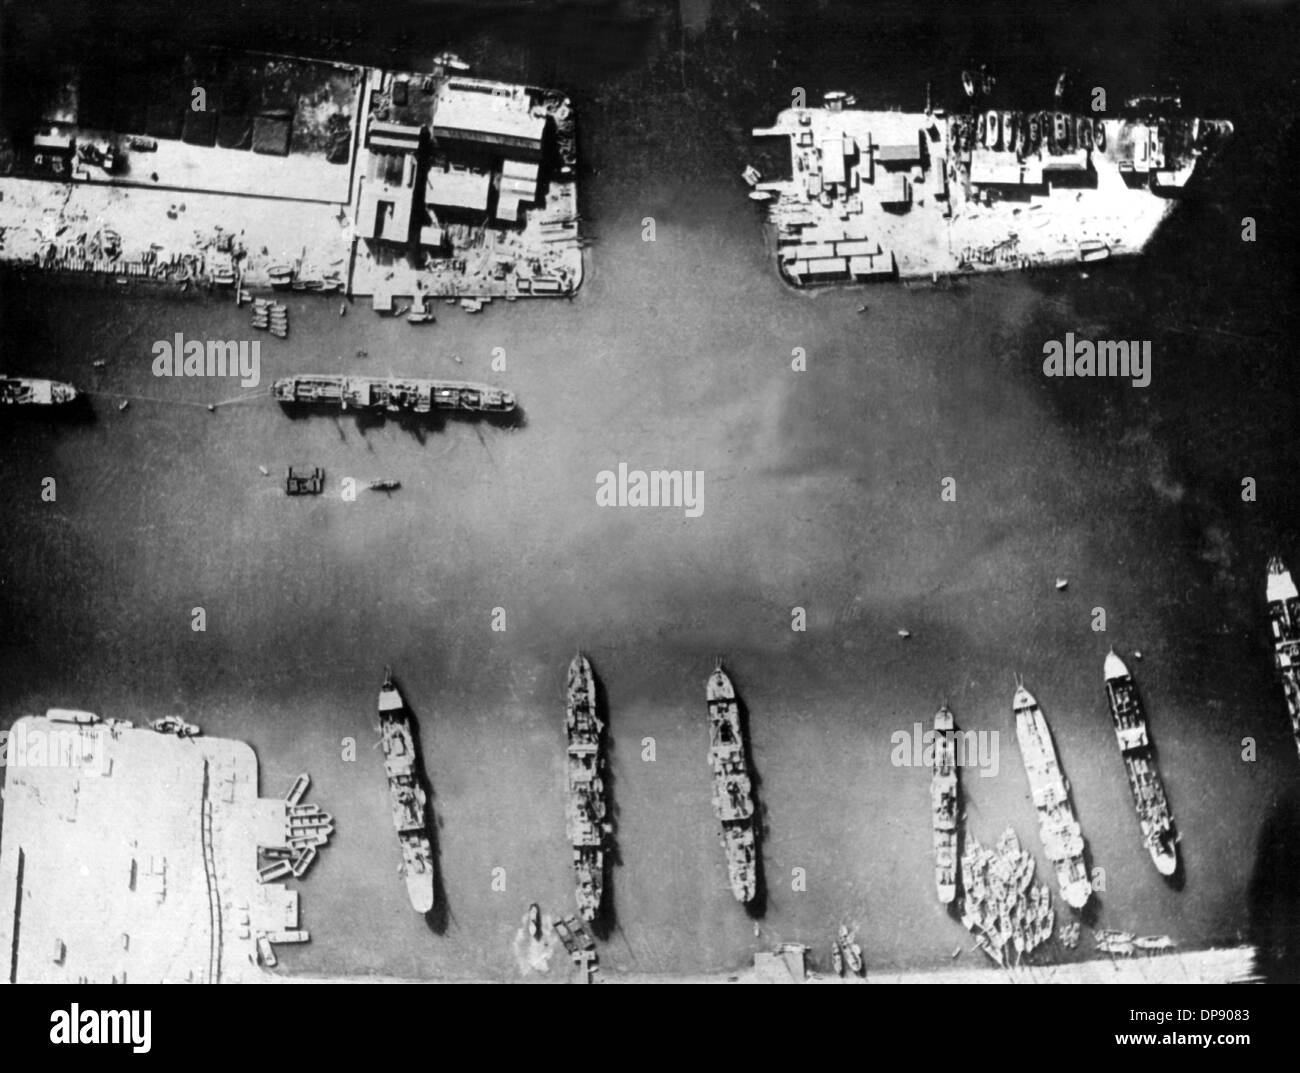 Aerial photograph of the port facilities of PortSaid at the Suez Canal during World War I. Set off by the deadly shots on Austrian heir to the throne Franz Ferdinand by Serbian nationalists on the 28th of June in 1914 in Sarajevo, World War I broke out. During World War I, Germany, Austria, Austria-Hungary as well as later Turkey and Bulgary fought against Britain, France and Russia. The sad end result in 1918 comprised roughly 8.5 million soldiers killed in action, more than 21 million wounded and almost 8 million prisoners of war and missing people. Stock Photo